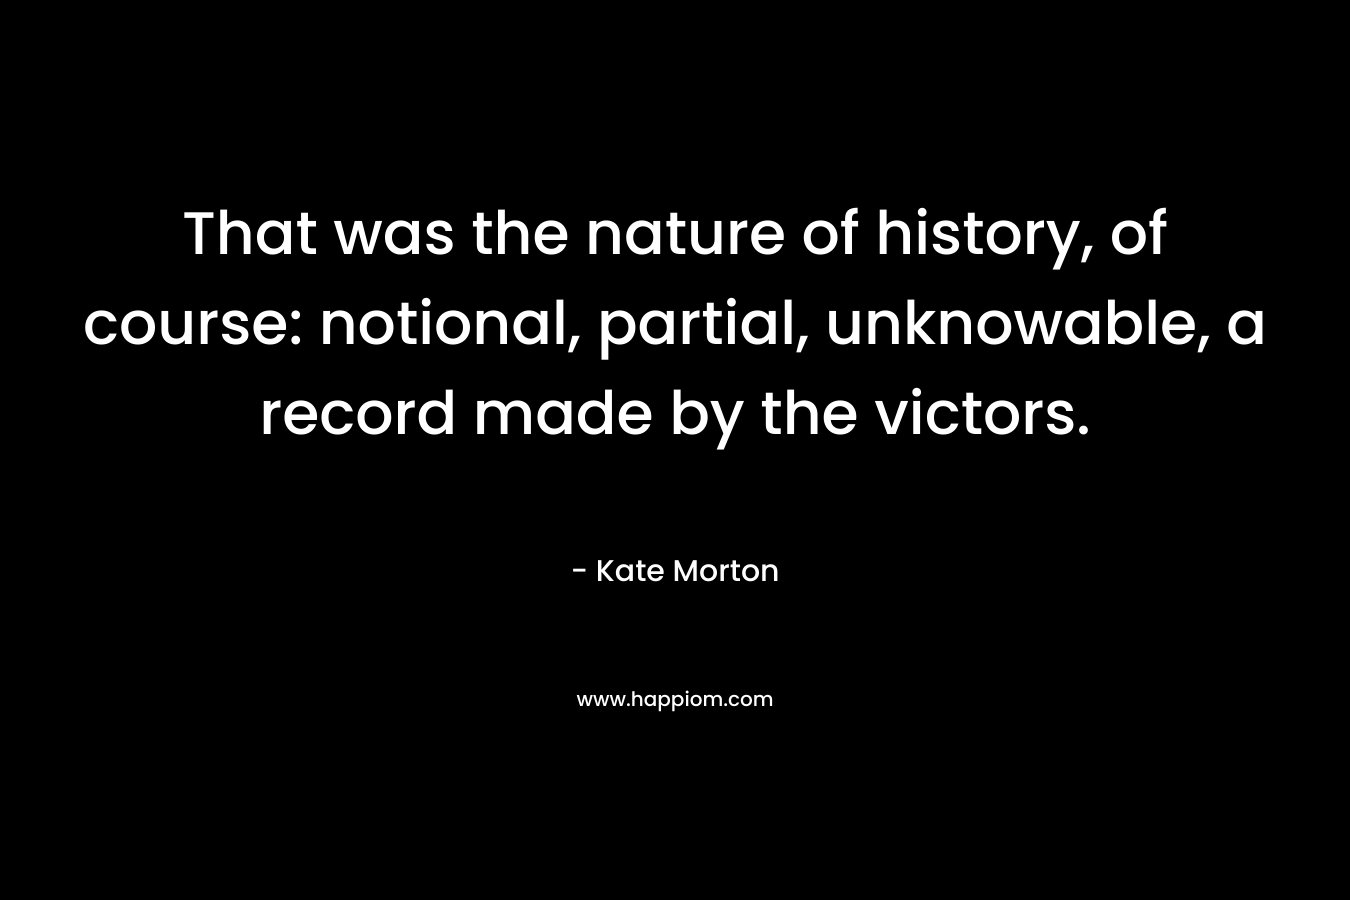 That was the nature of history, of course: notional, partial, unknowable, a record made by the victors. – Kate Morton